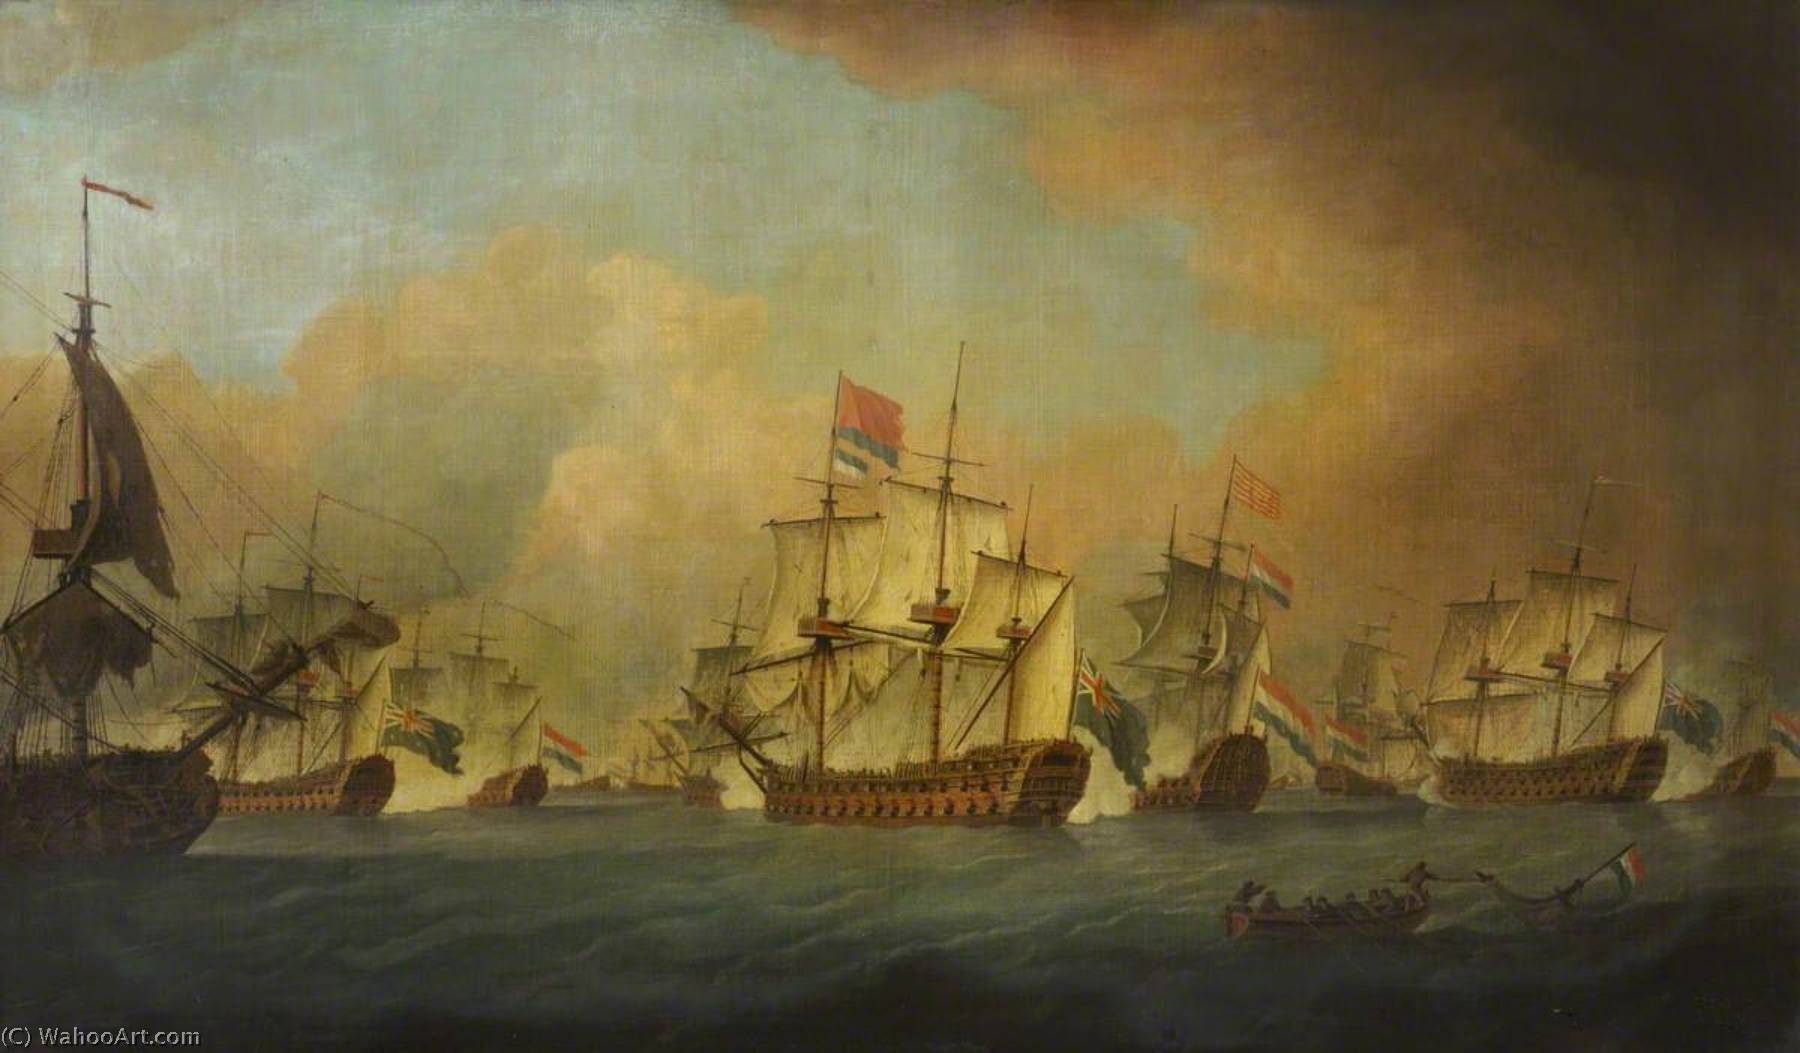 WikiOO.org - 백과 사전 - 회화, 삽화 Richard Paton - The Battle of the Dogger Bank, 5 August 1781